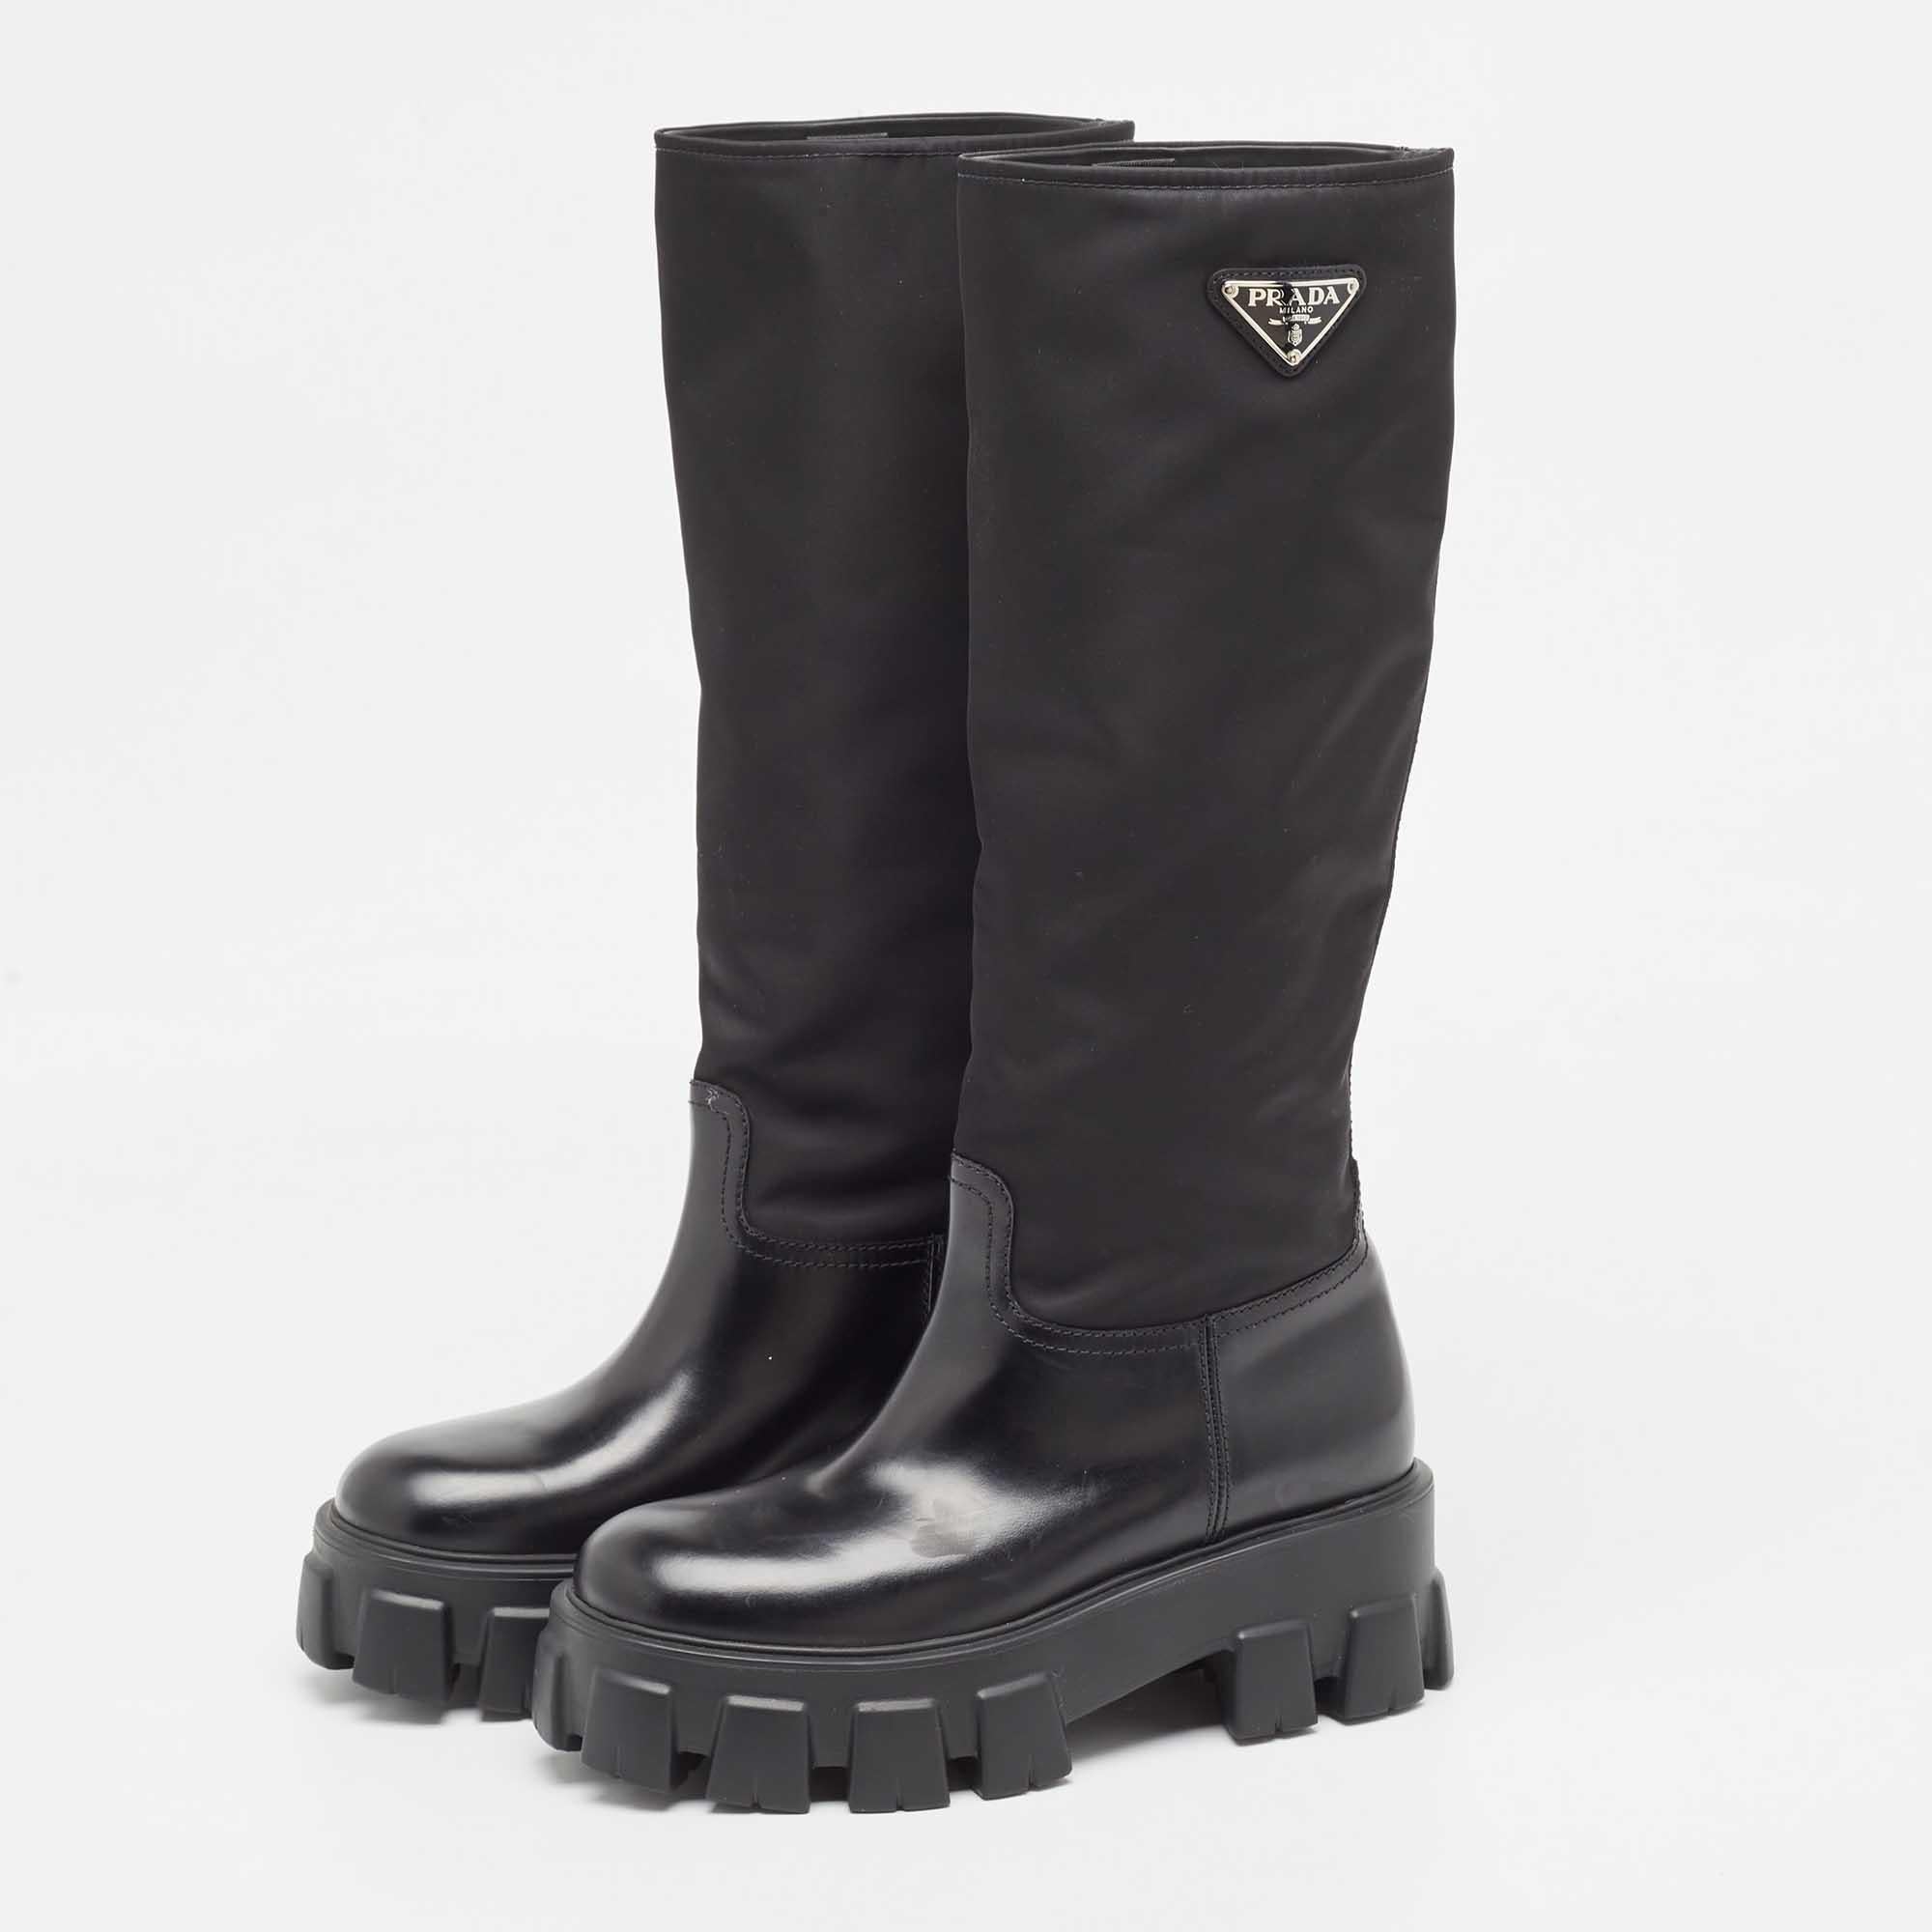 Nail a confident look with these Prada Monolith boots! They're made of leather as well as nylon and have the iconic triangle logo on the sides.

